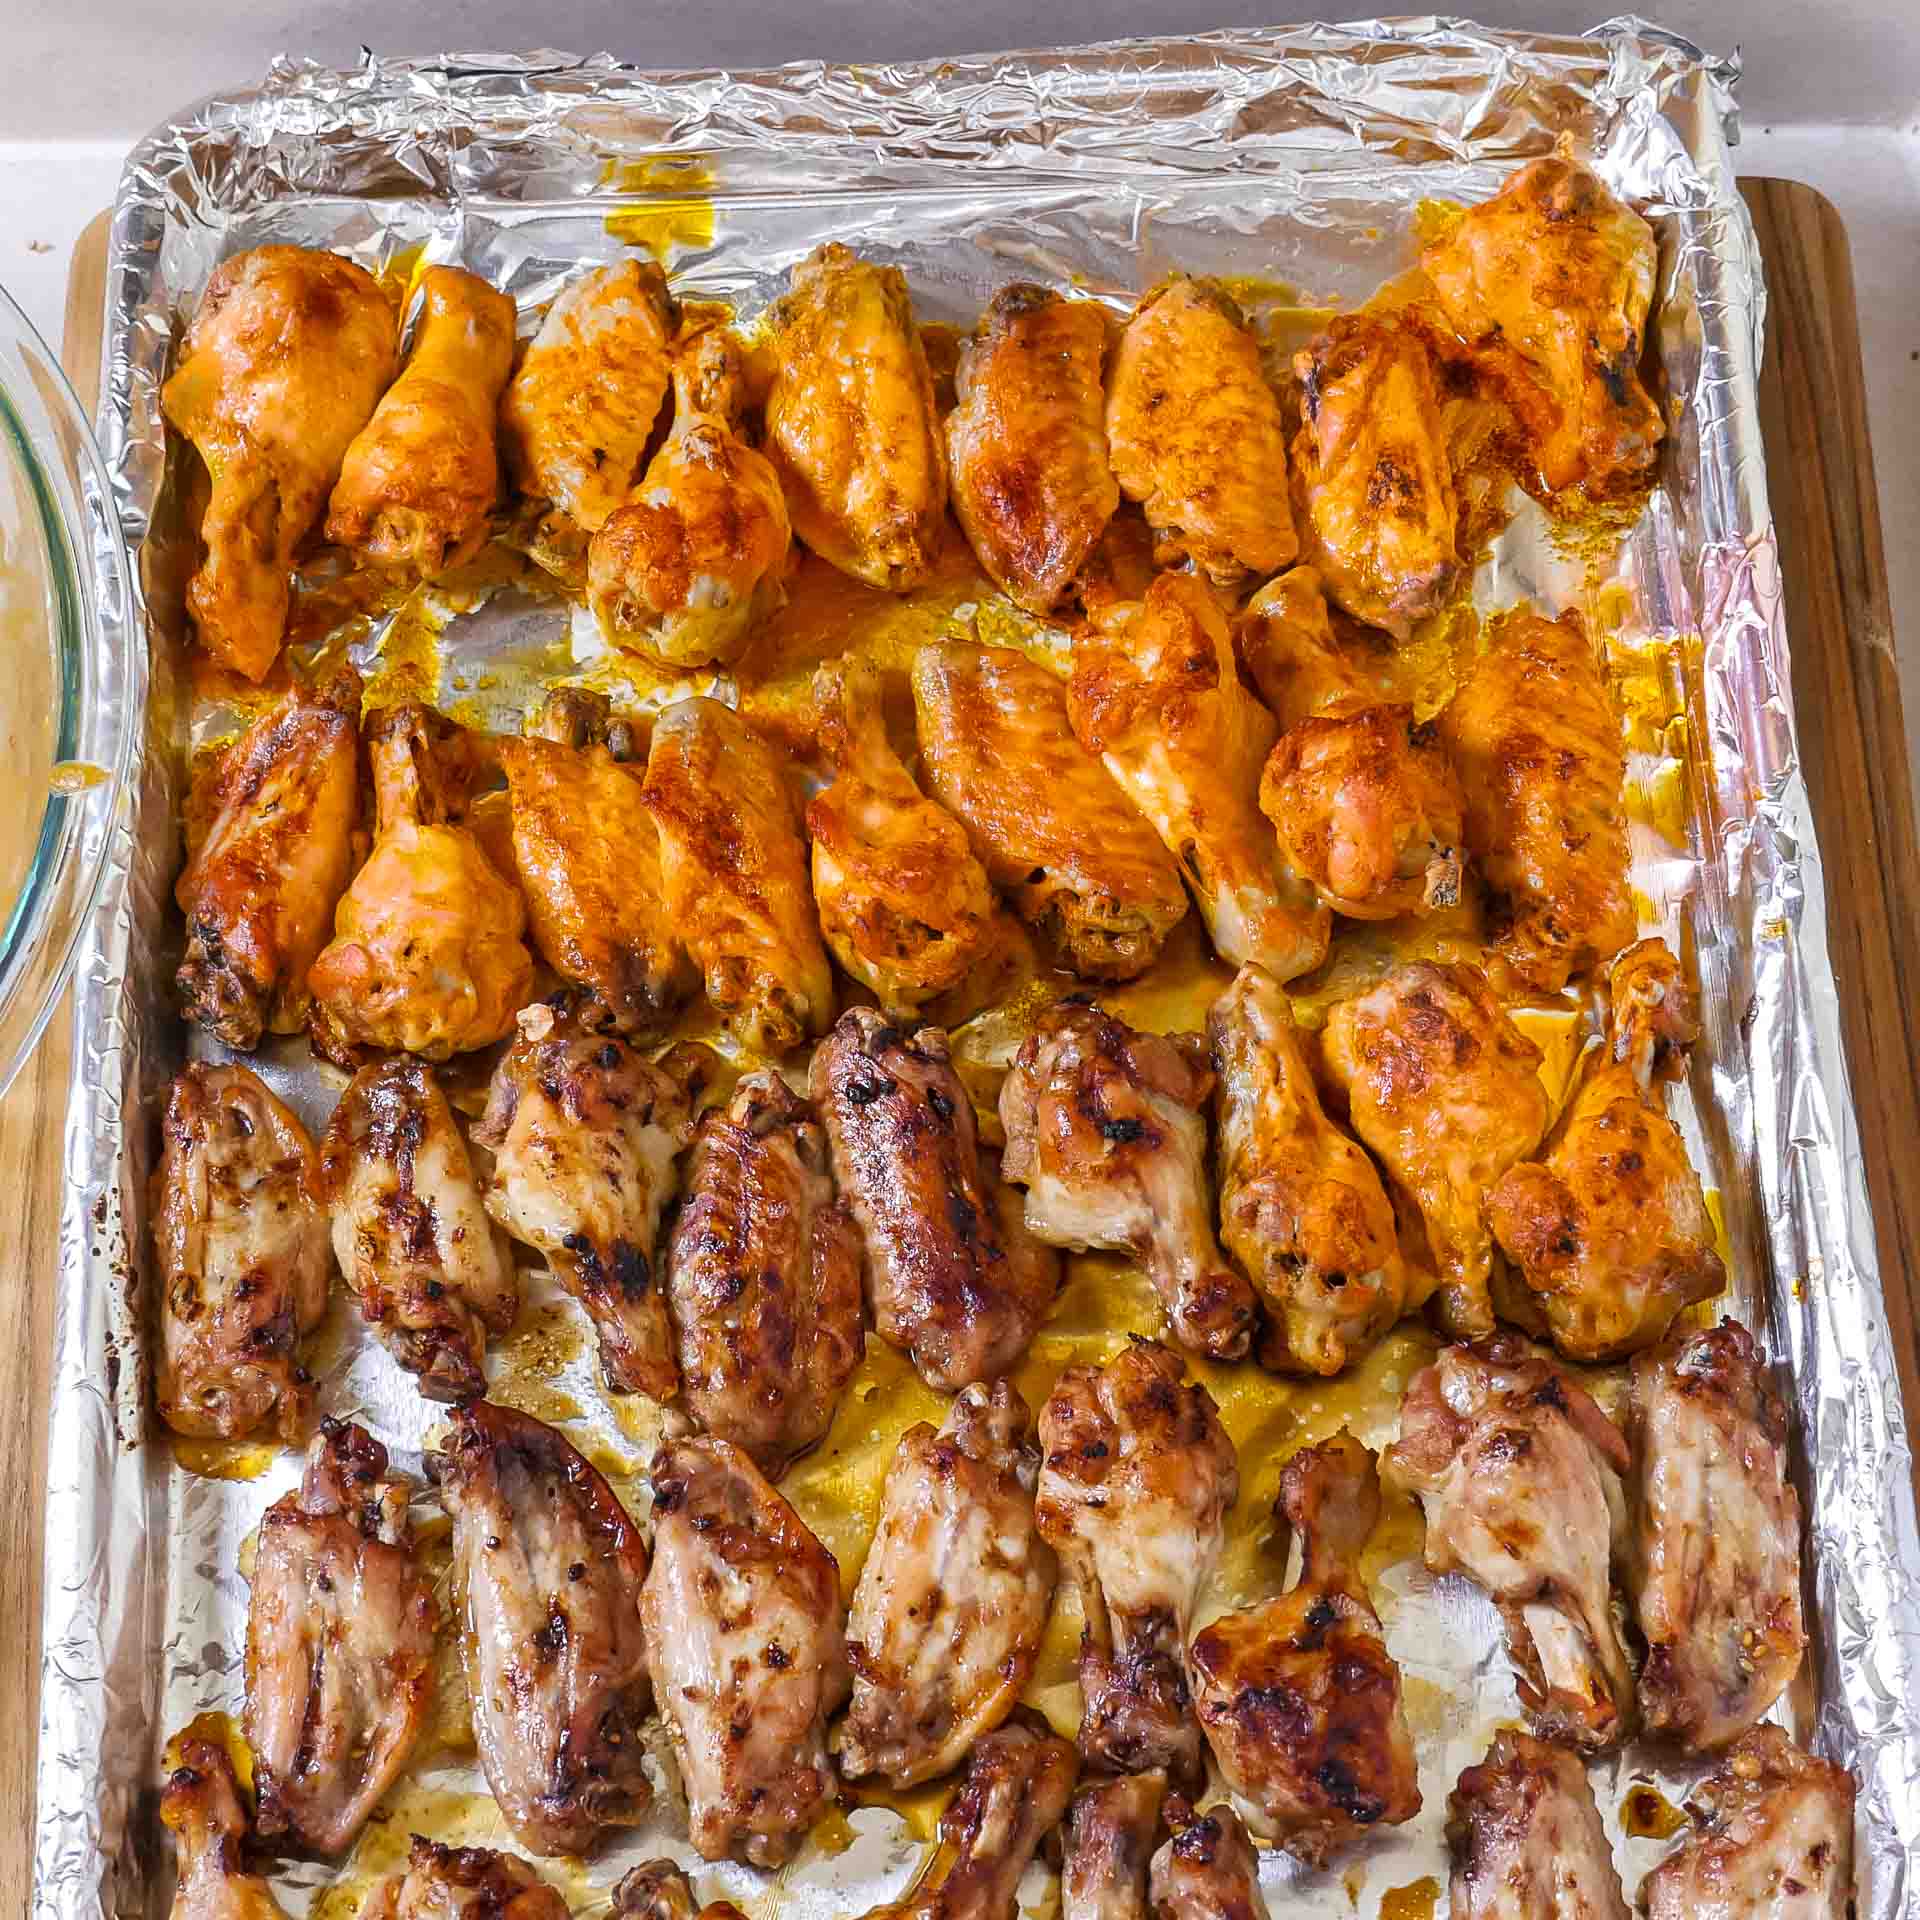 Chicken wings sauced and on a baking sheet to broil